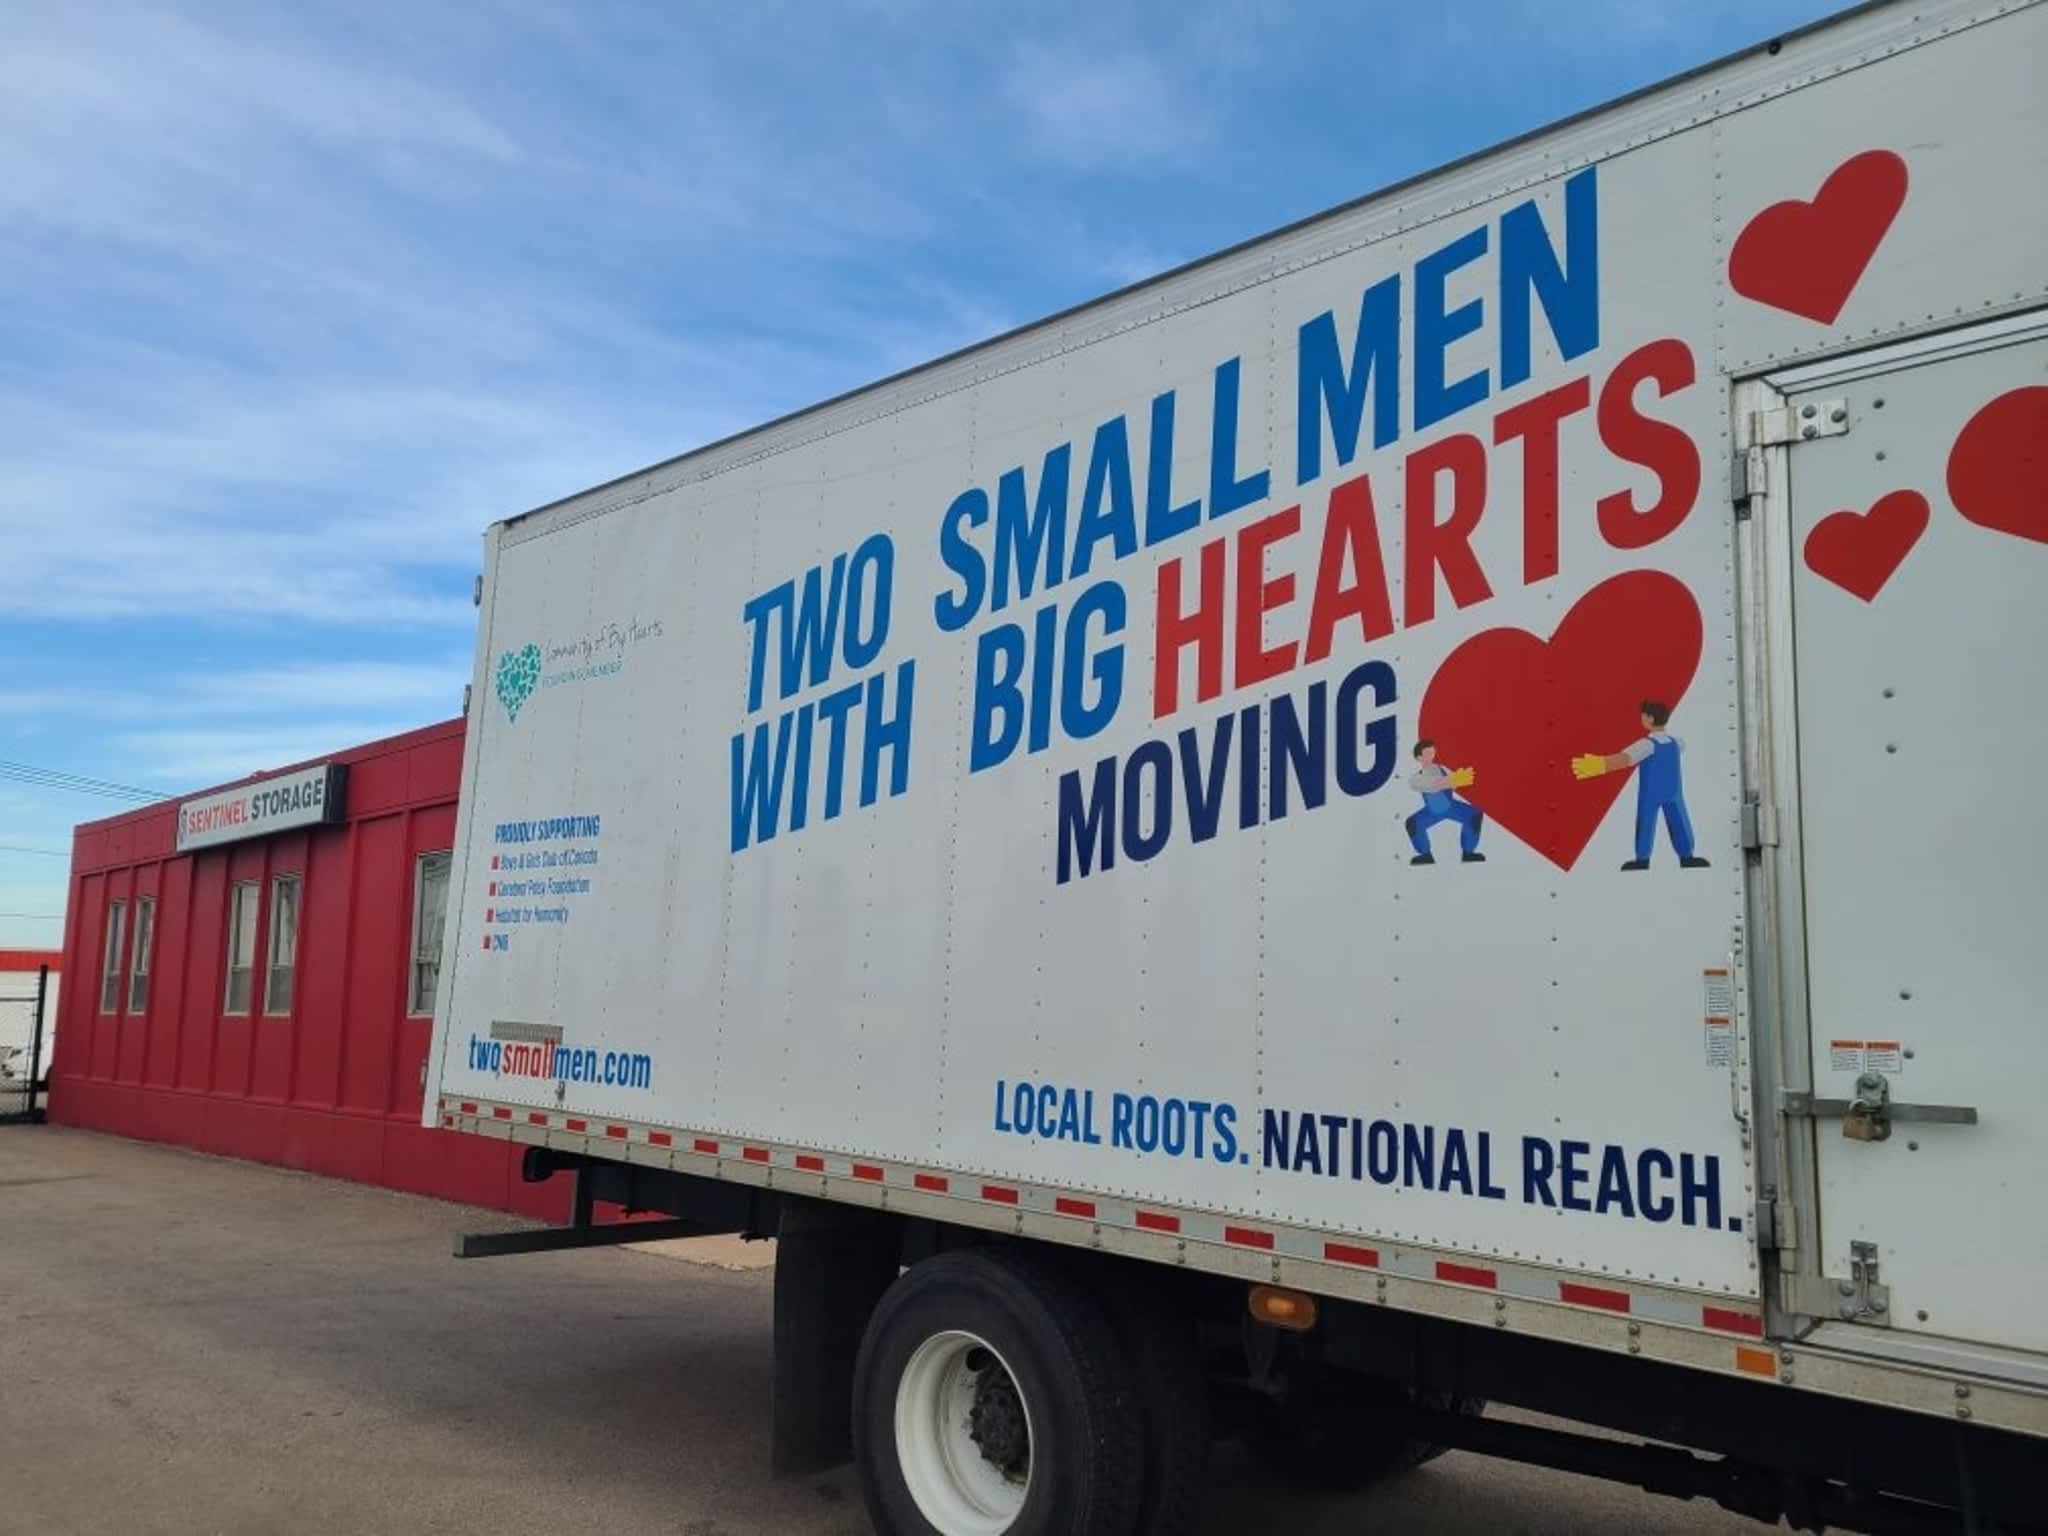 photo Two Small Men With Big Hearts Moving Company